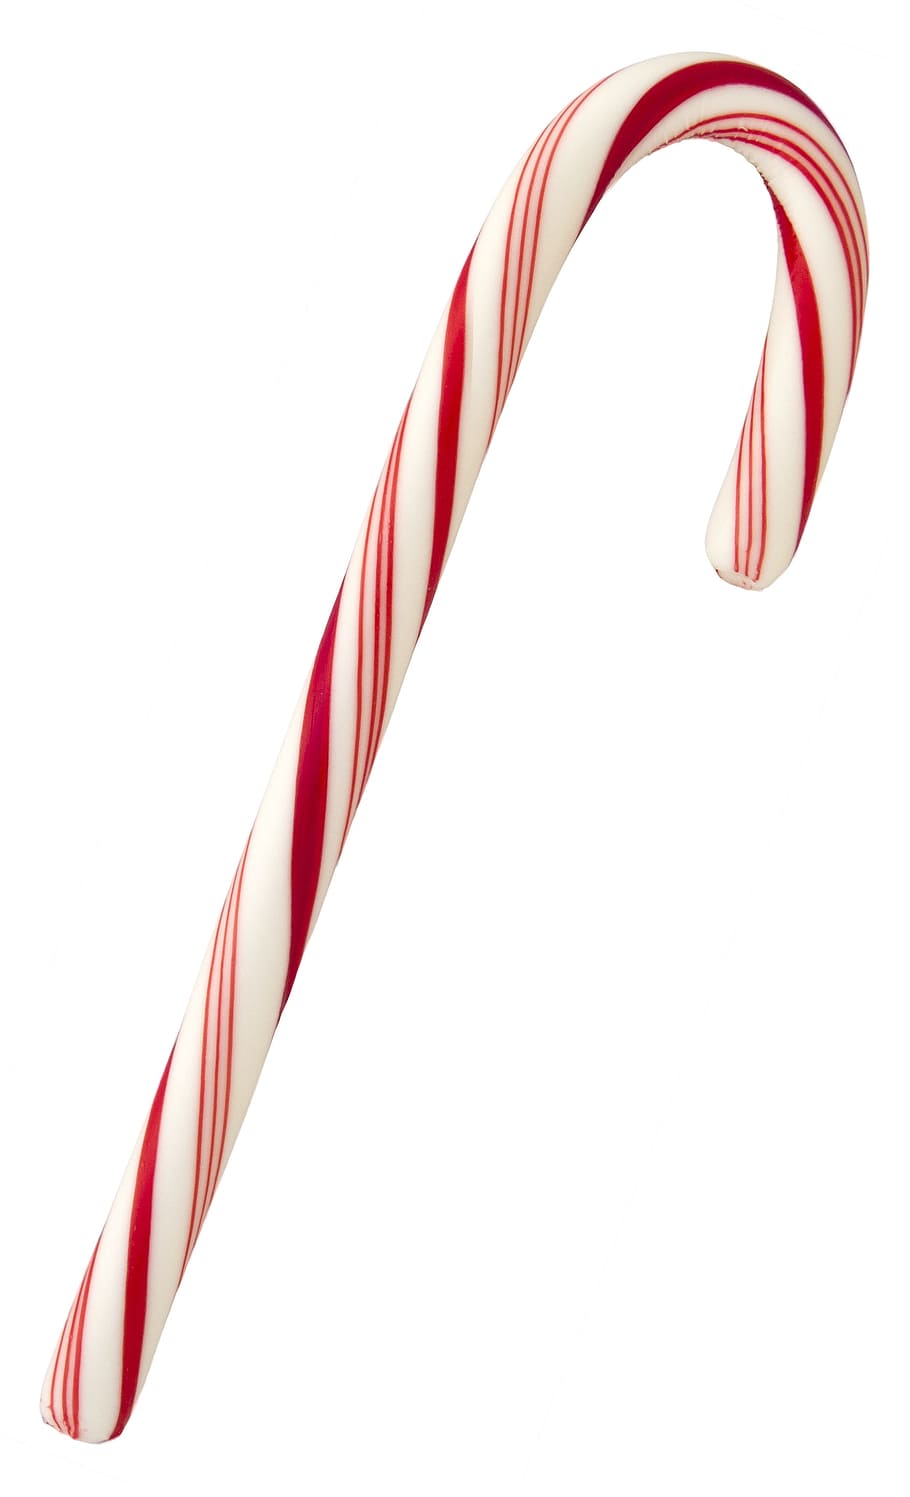 white, red, candy cane, peppermint, candy, christmas, sweet, holiday, food, striped